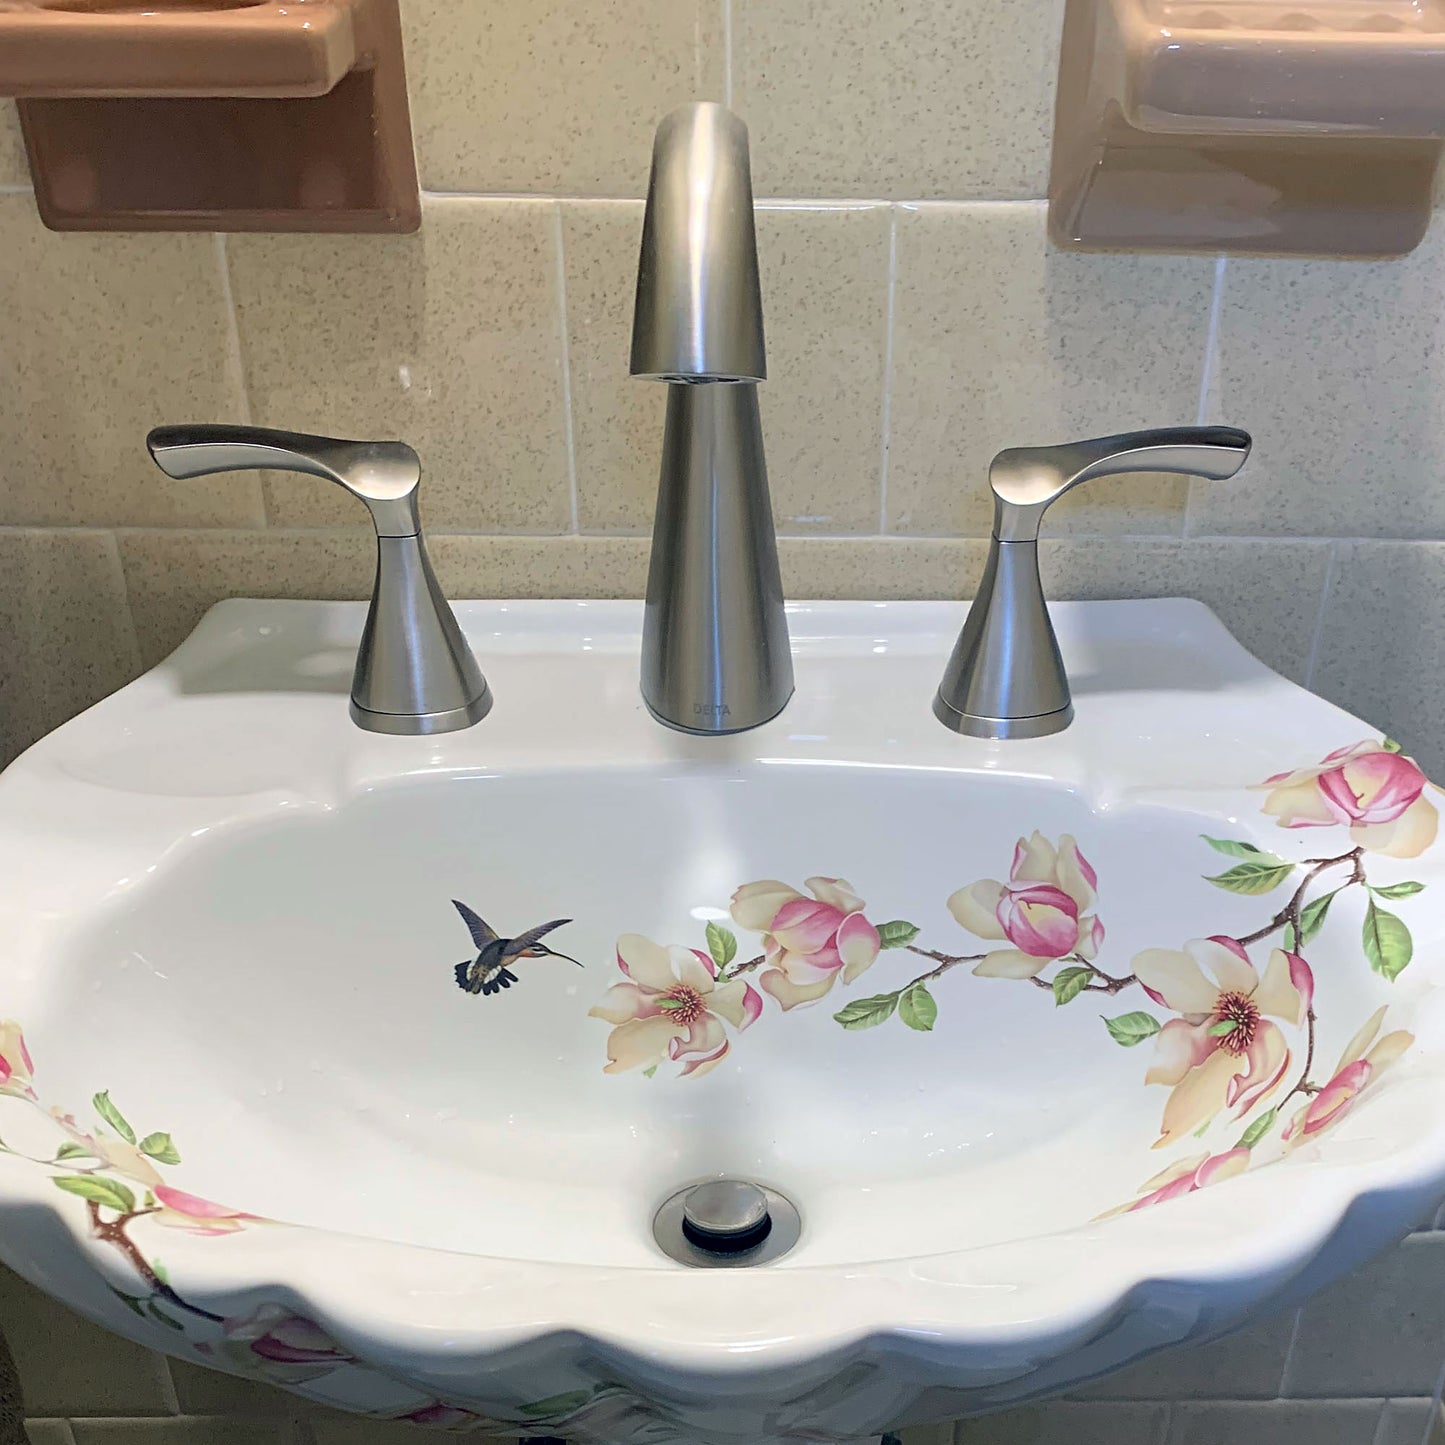 Bathroom with Pedestal sink painted with Magnolia blossoms and hummingbird.